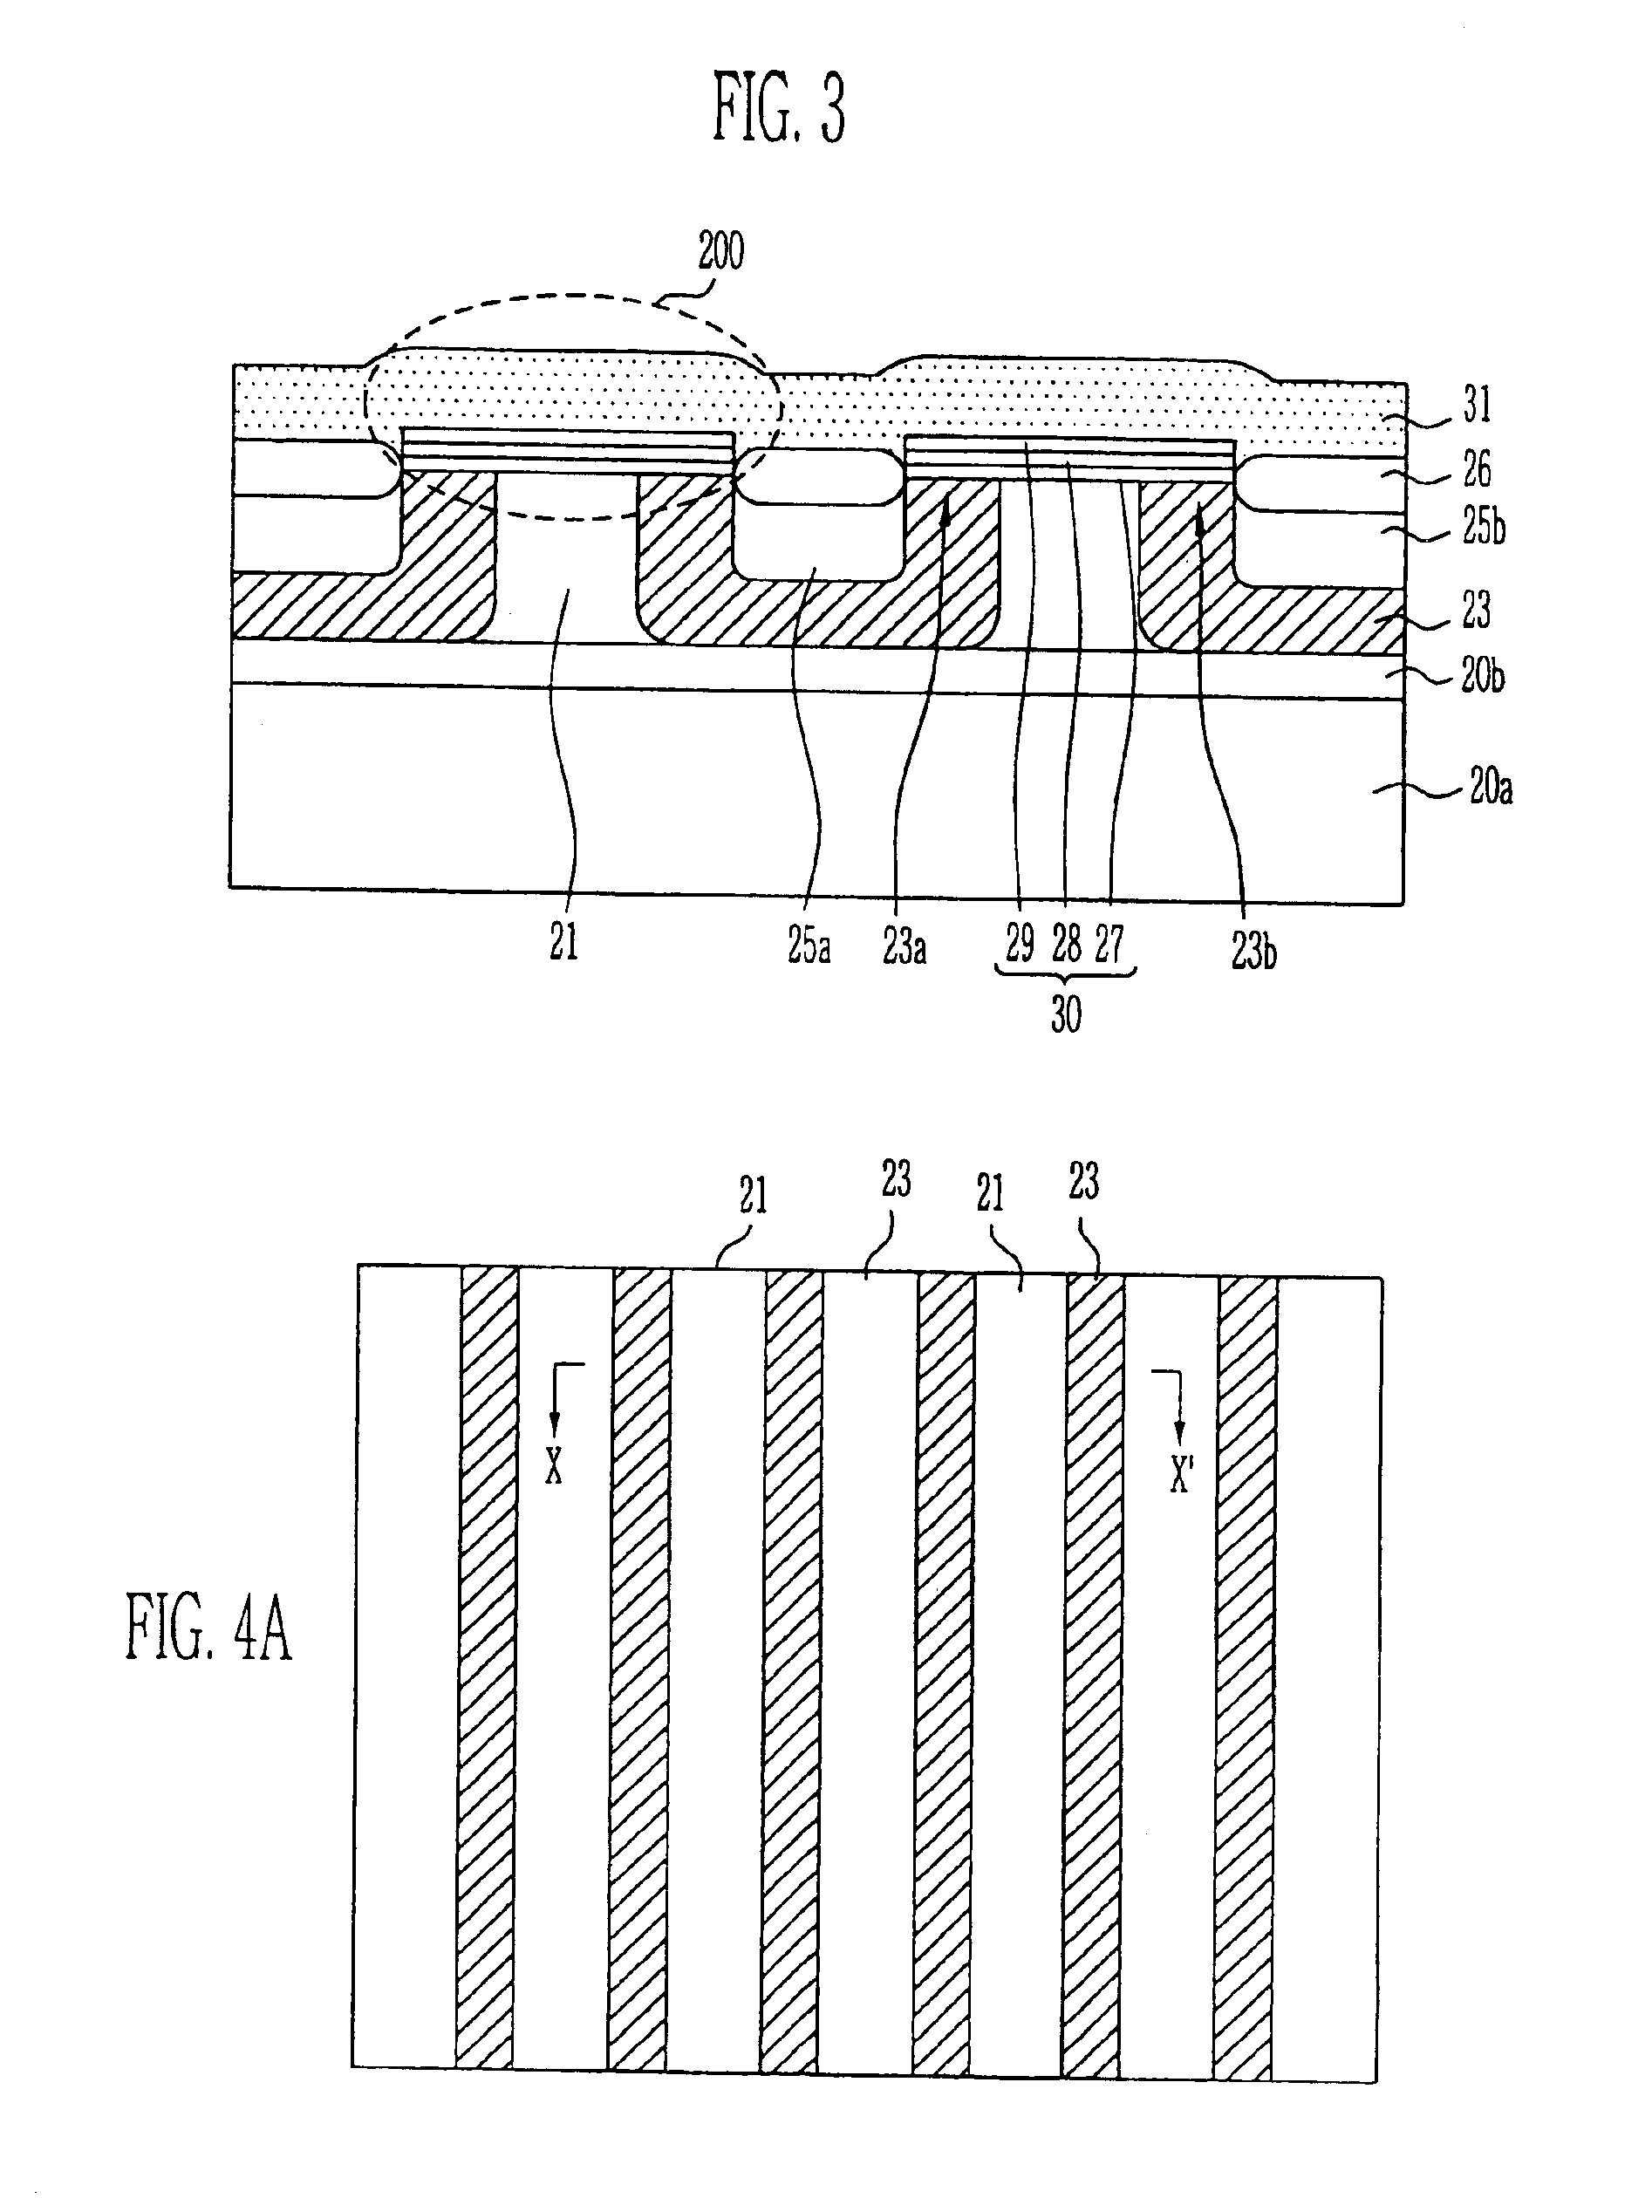 Flash memory cell and method of manufacturing the same, and programming/erasing/reading method in the flash memory cell